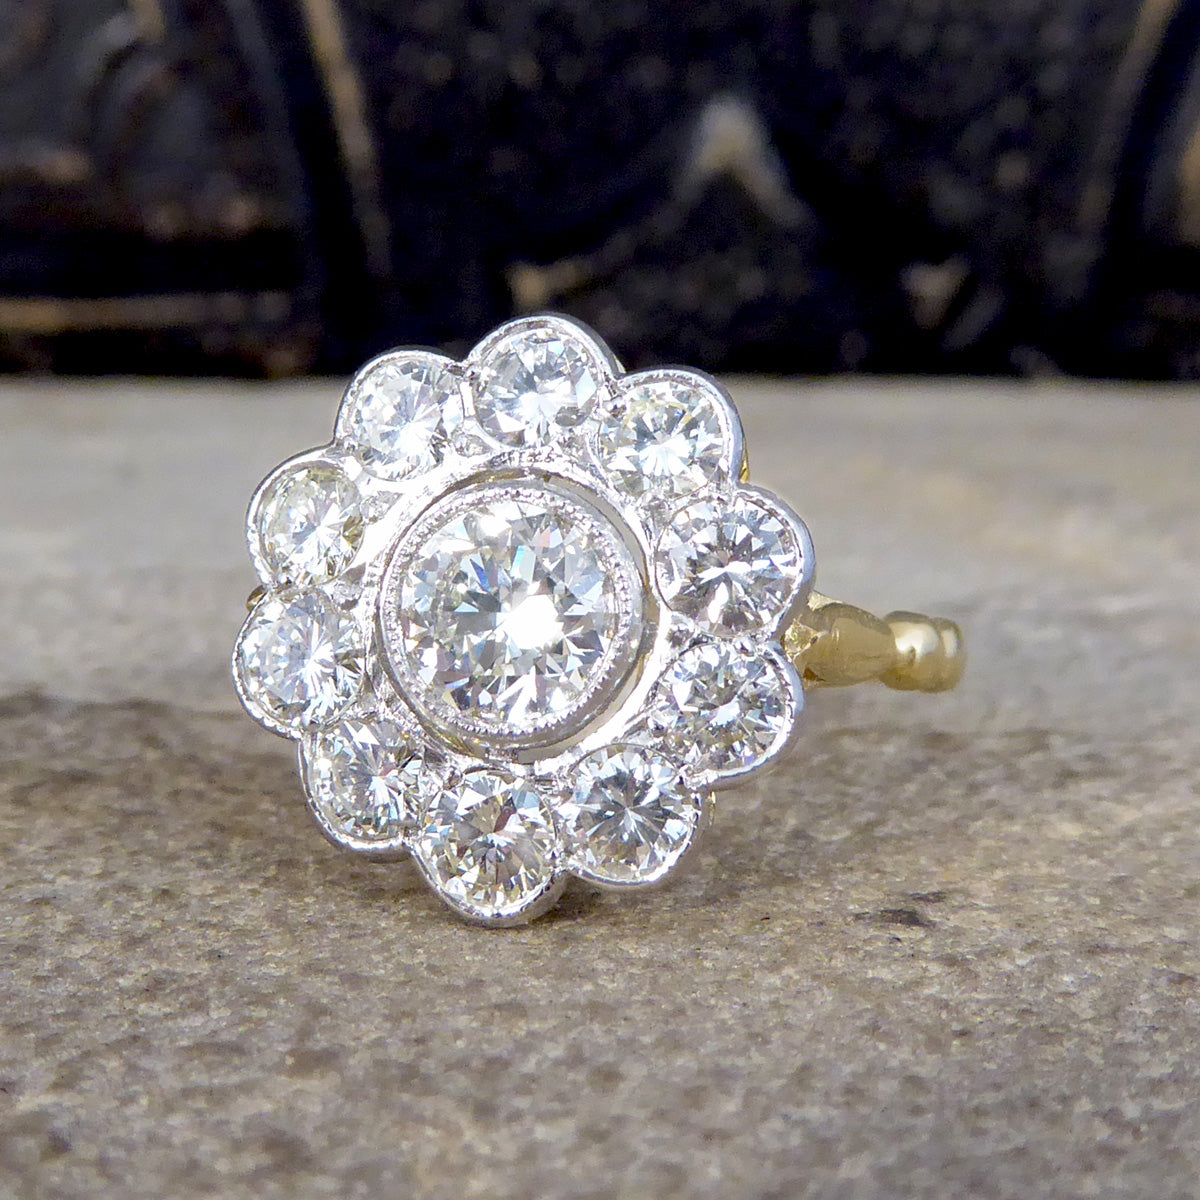 1.85ct Diamond Daisy Halo Cluster Ring set in 18ct Yellow Gold and Platinum